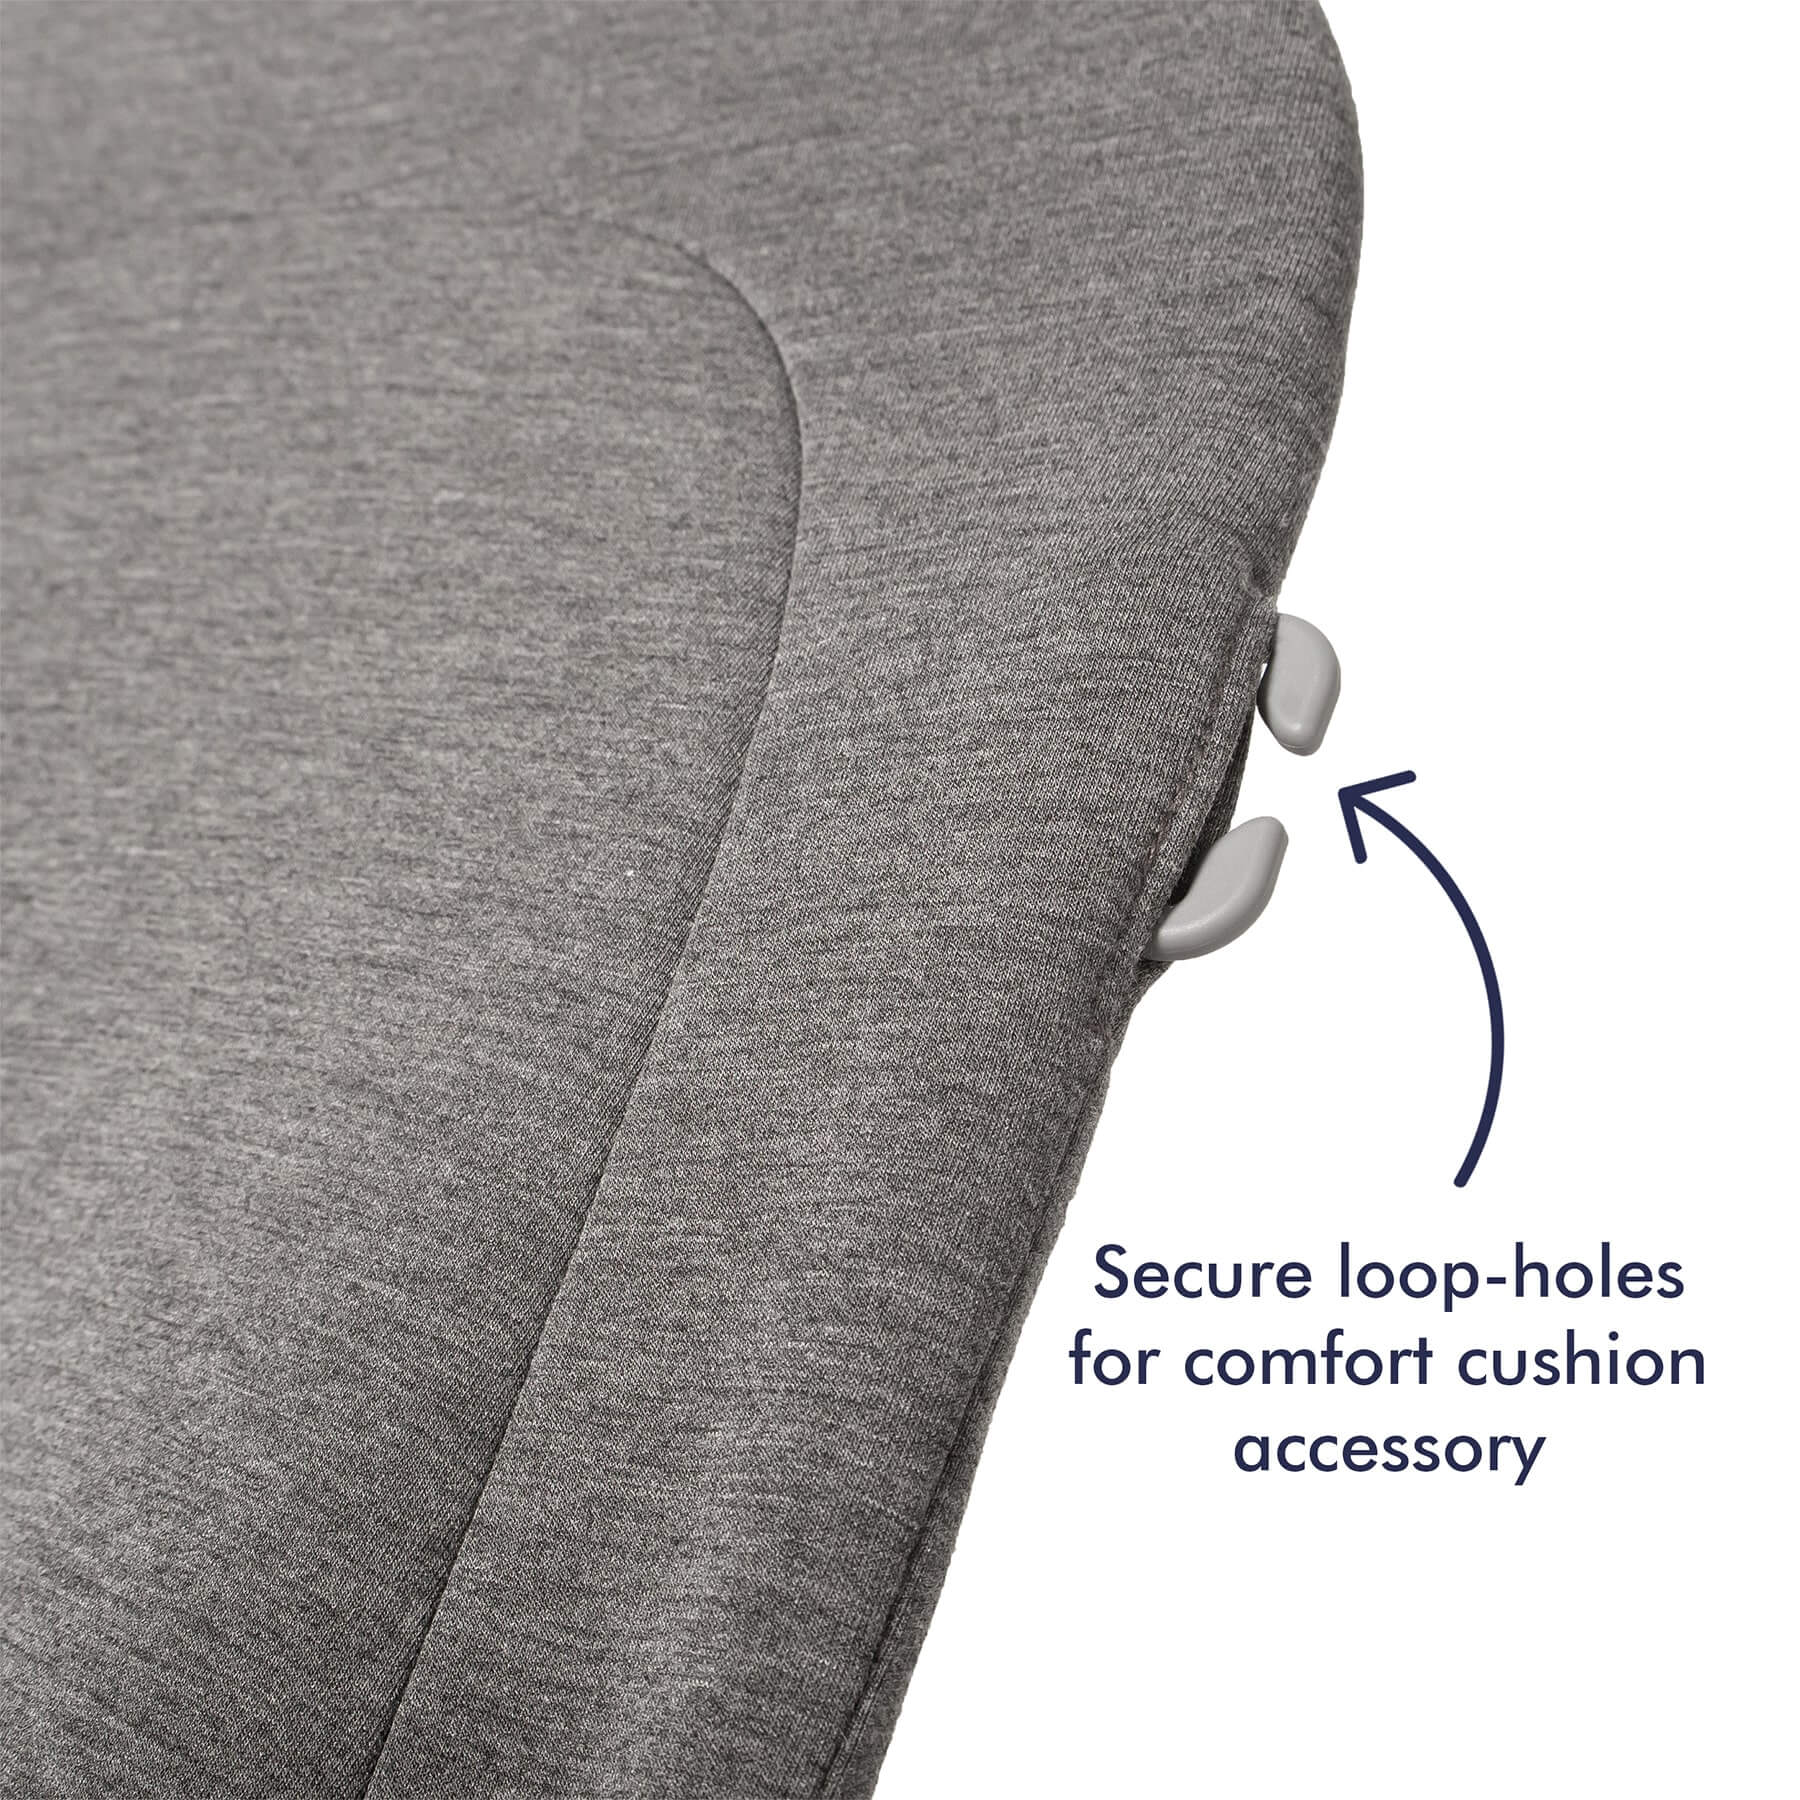 Babocush bouncer has loops for cushion accessory